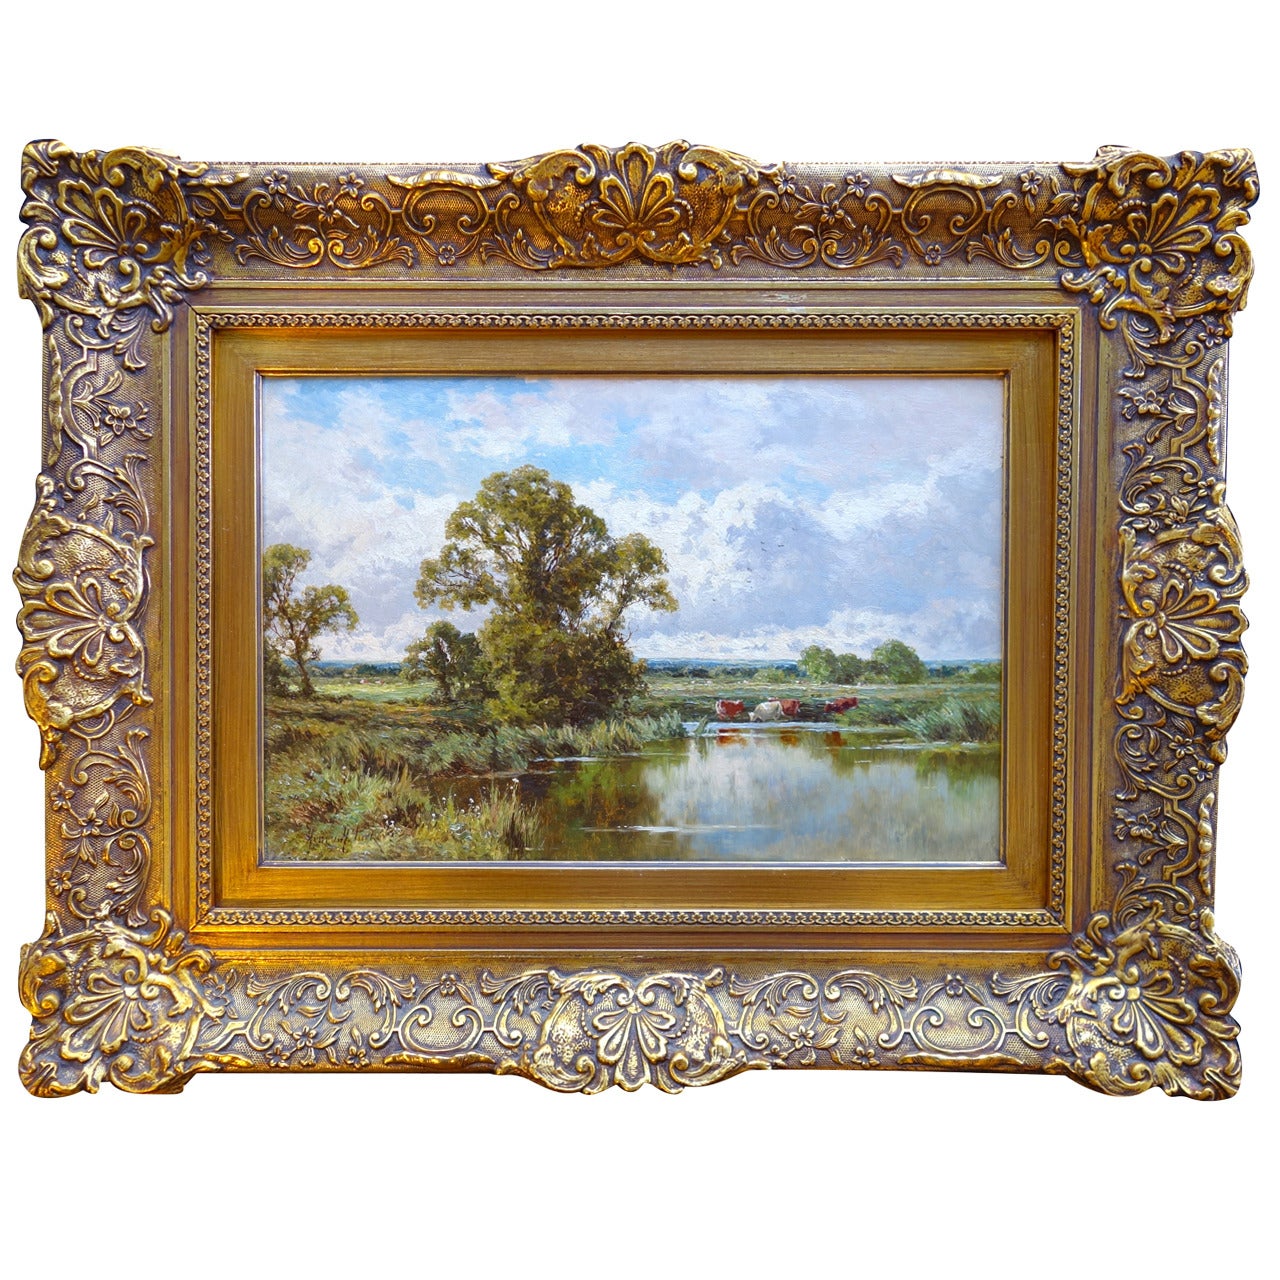 "English Countryside Scene" Painting by English Artist Henry Parker